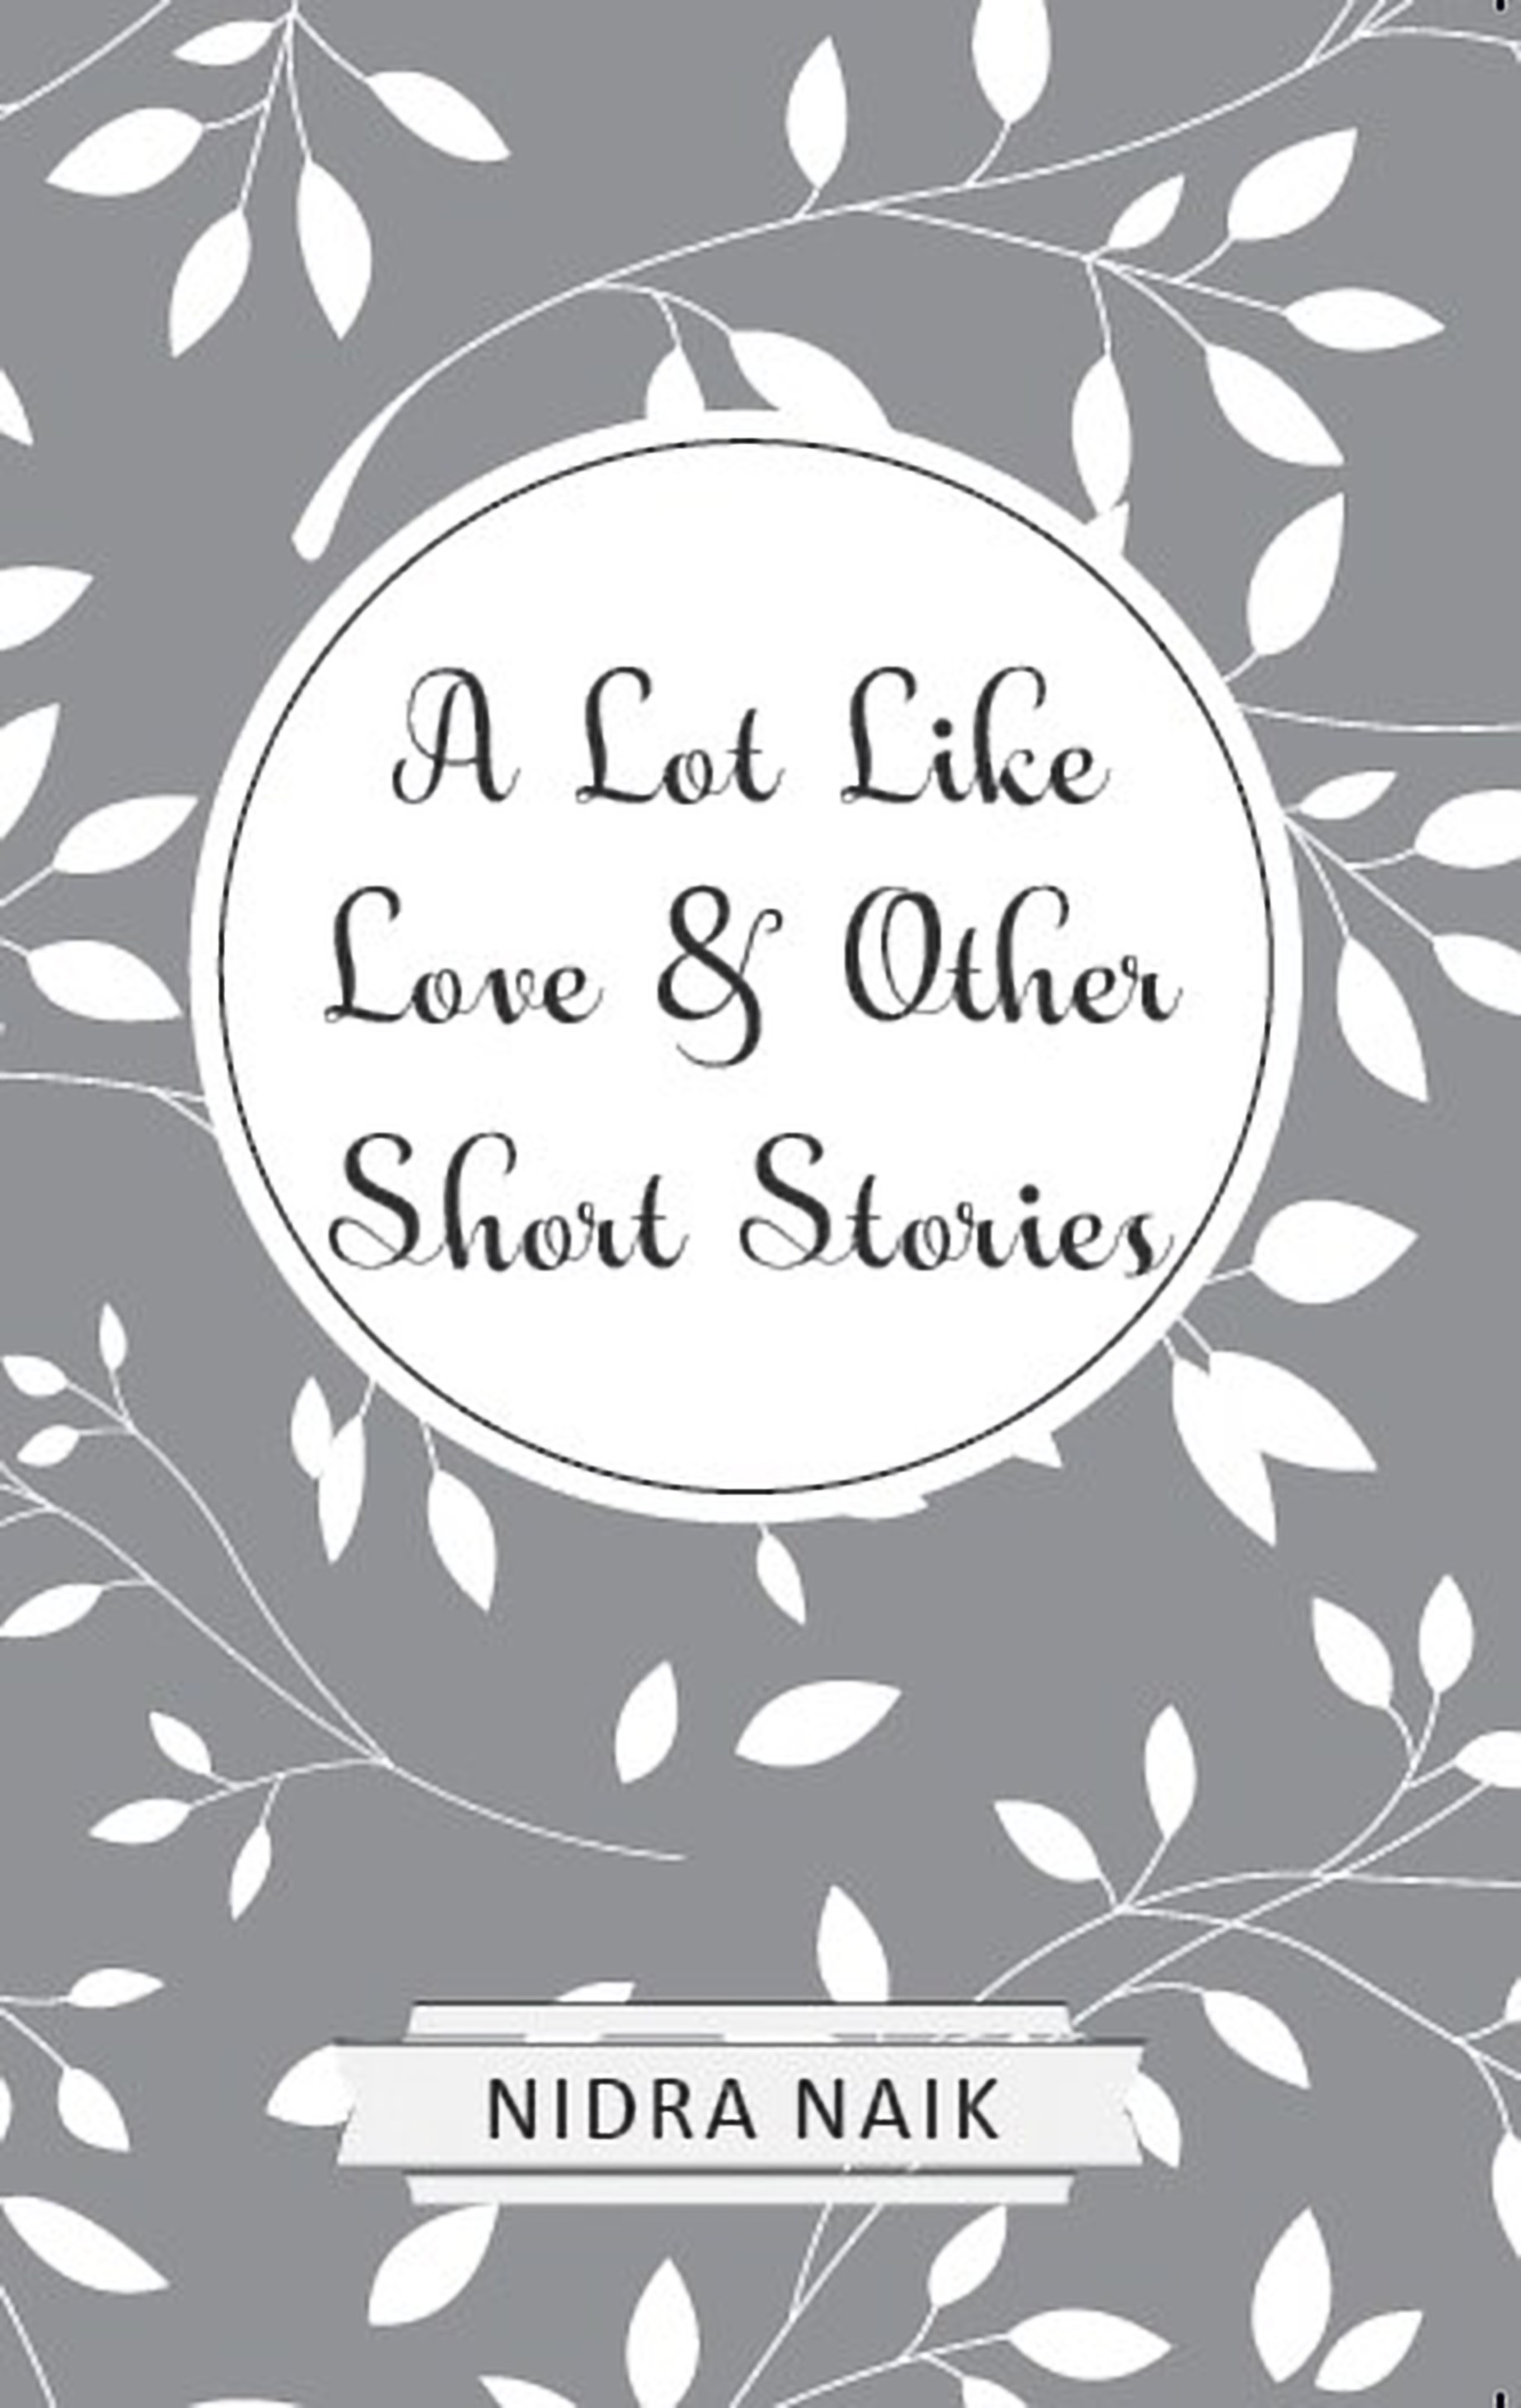 Image result for a lot like love & other short stories by nidra naik